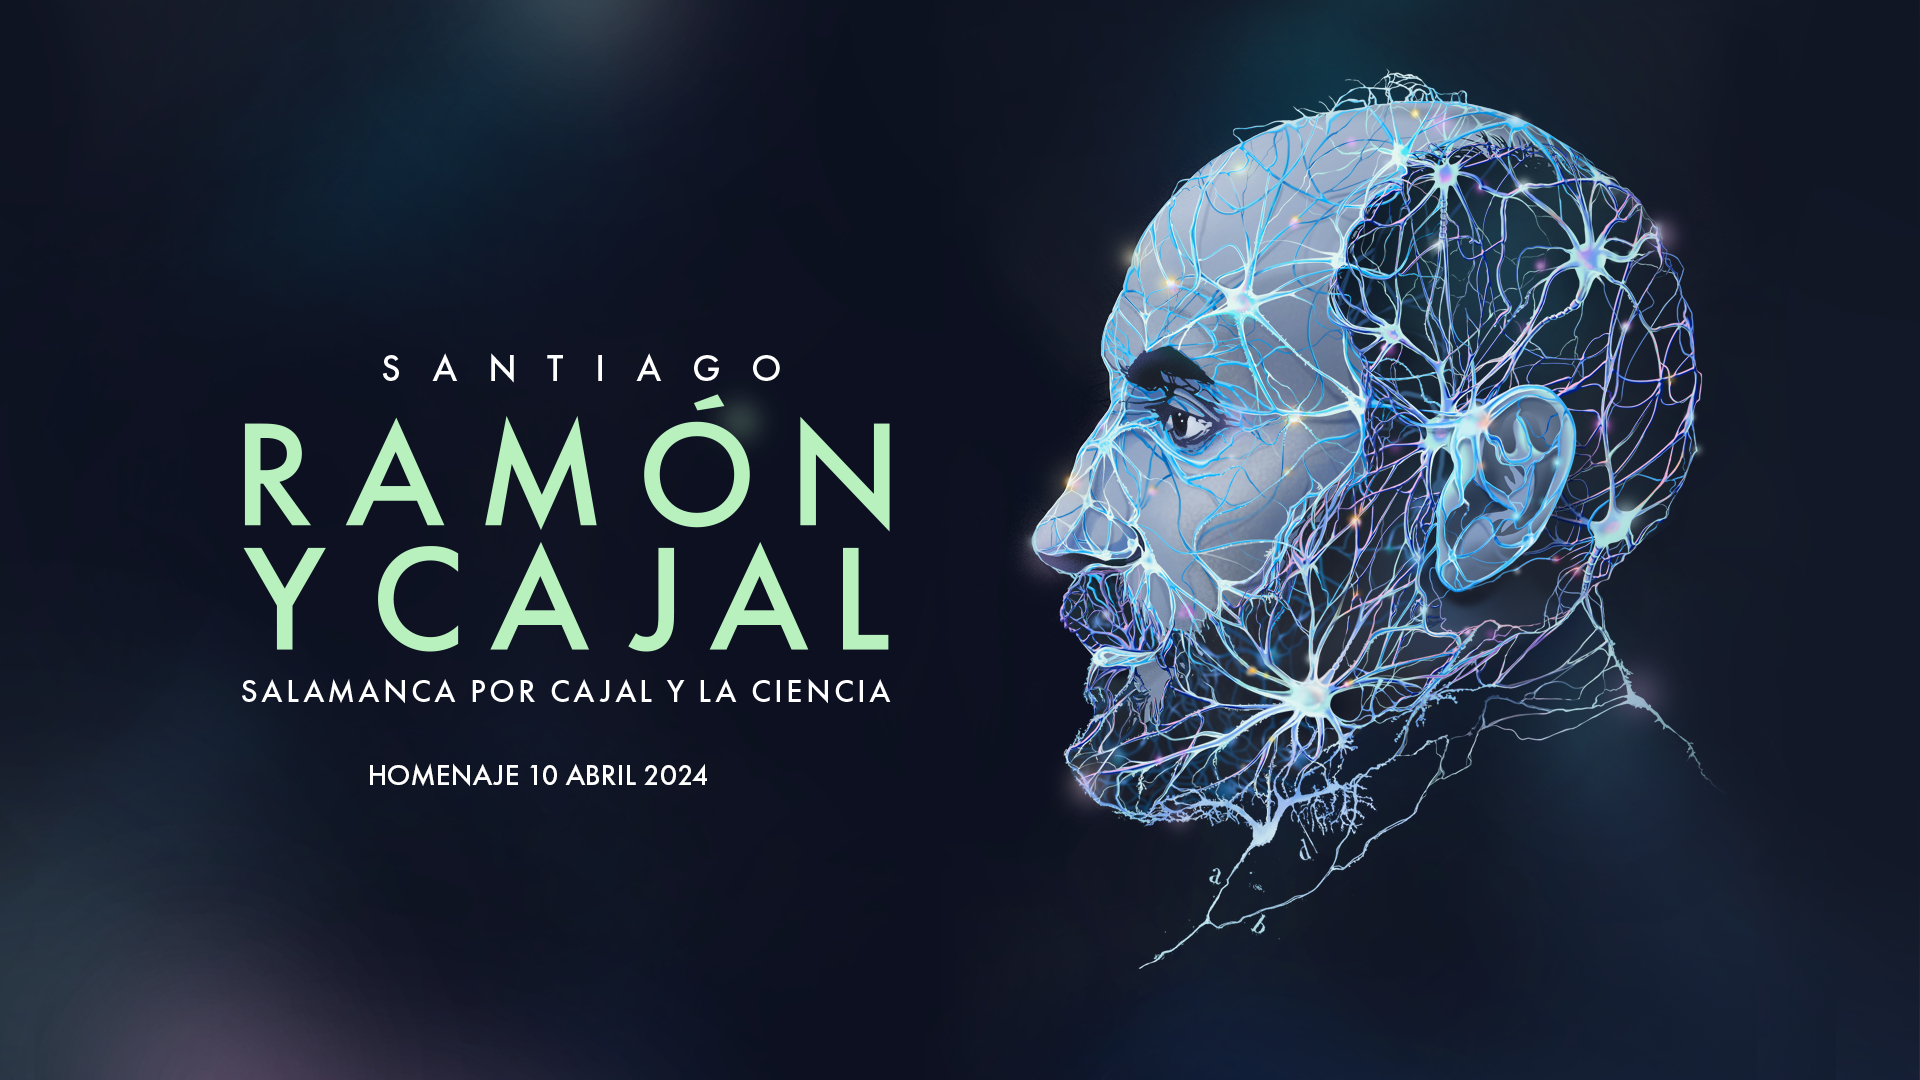 AIR Institute participates in the Tribute to Ramón y Cajal in Salamanca on April 10th